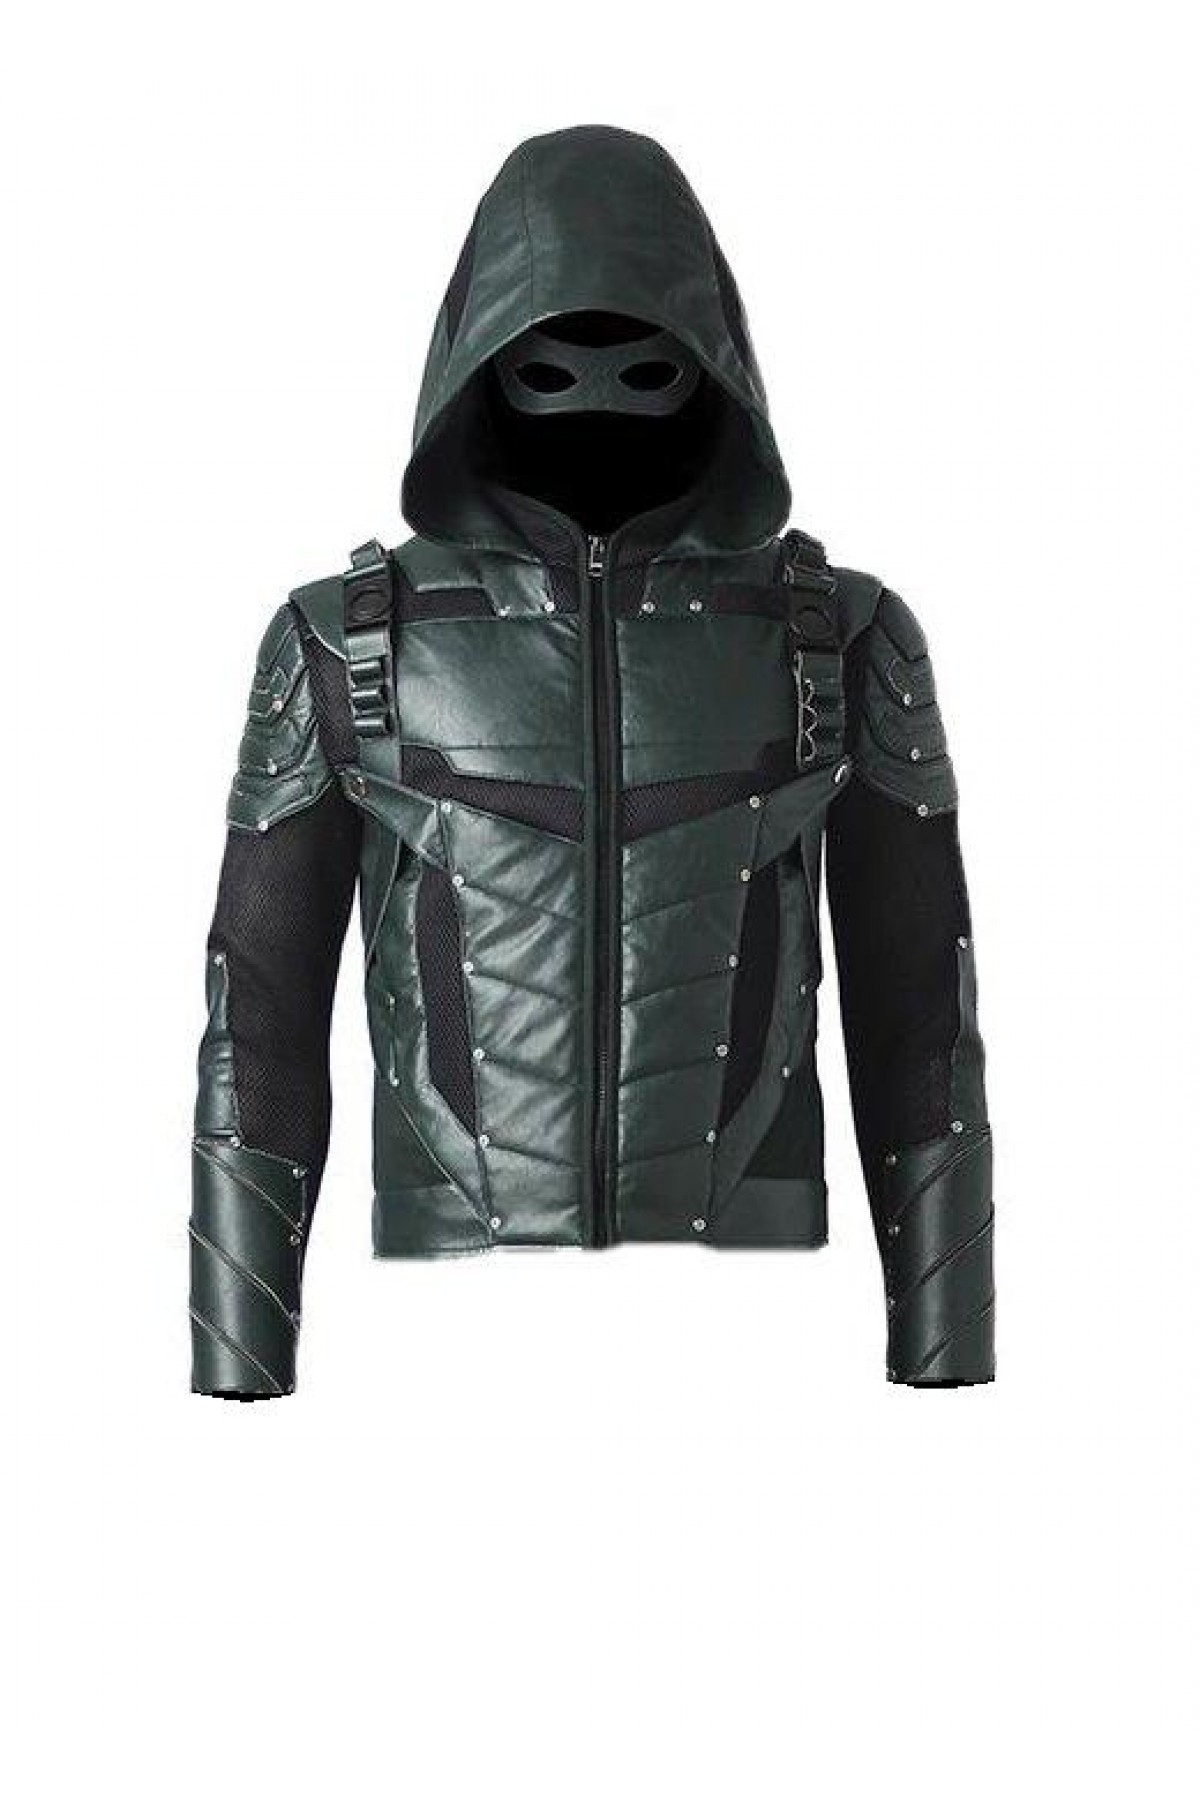 Arrow Season 5 Oliver Queen Leather Jacket Costume for sale